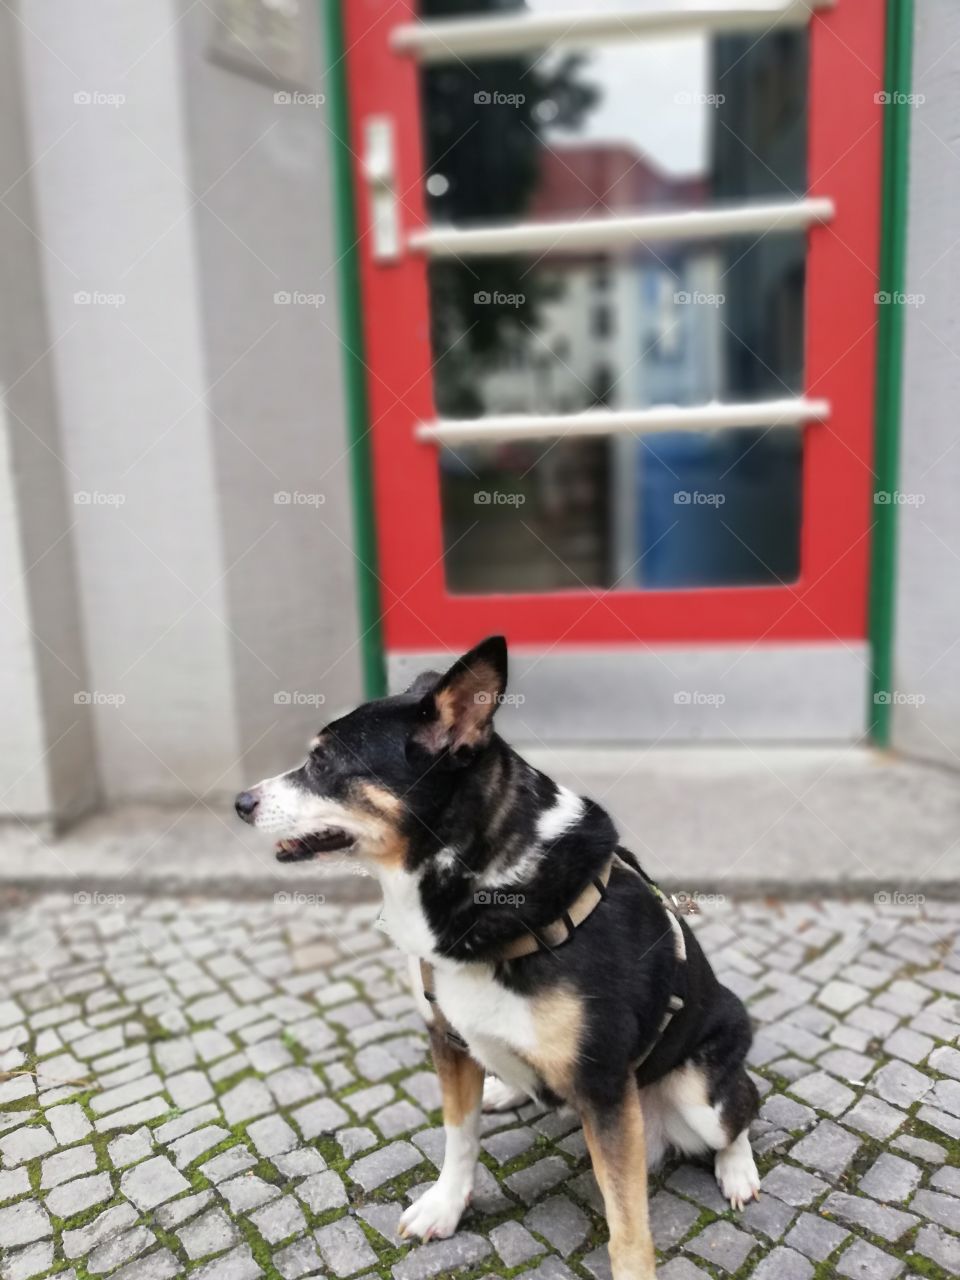 Cute dog in front of a red door outside